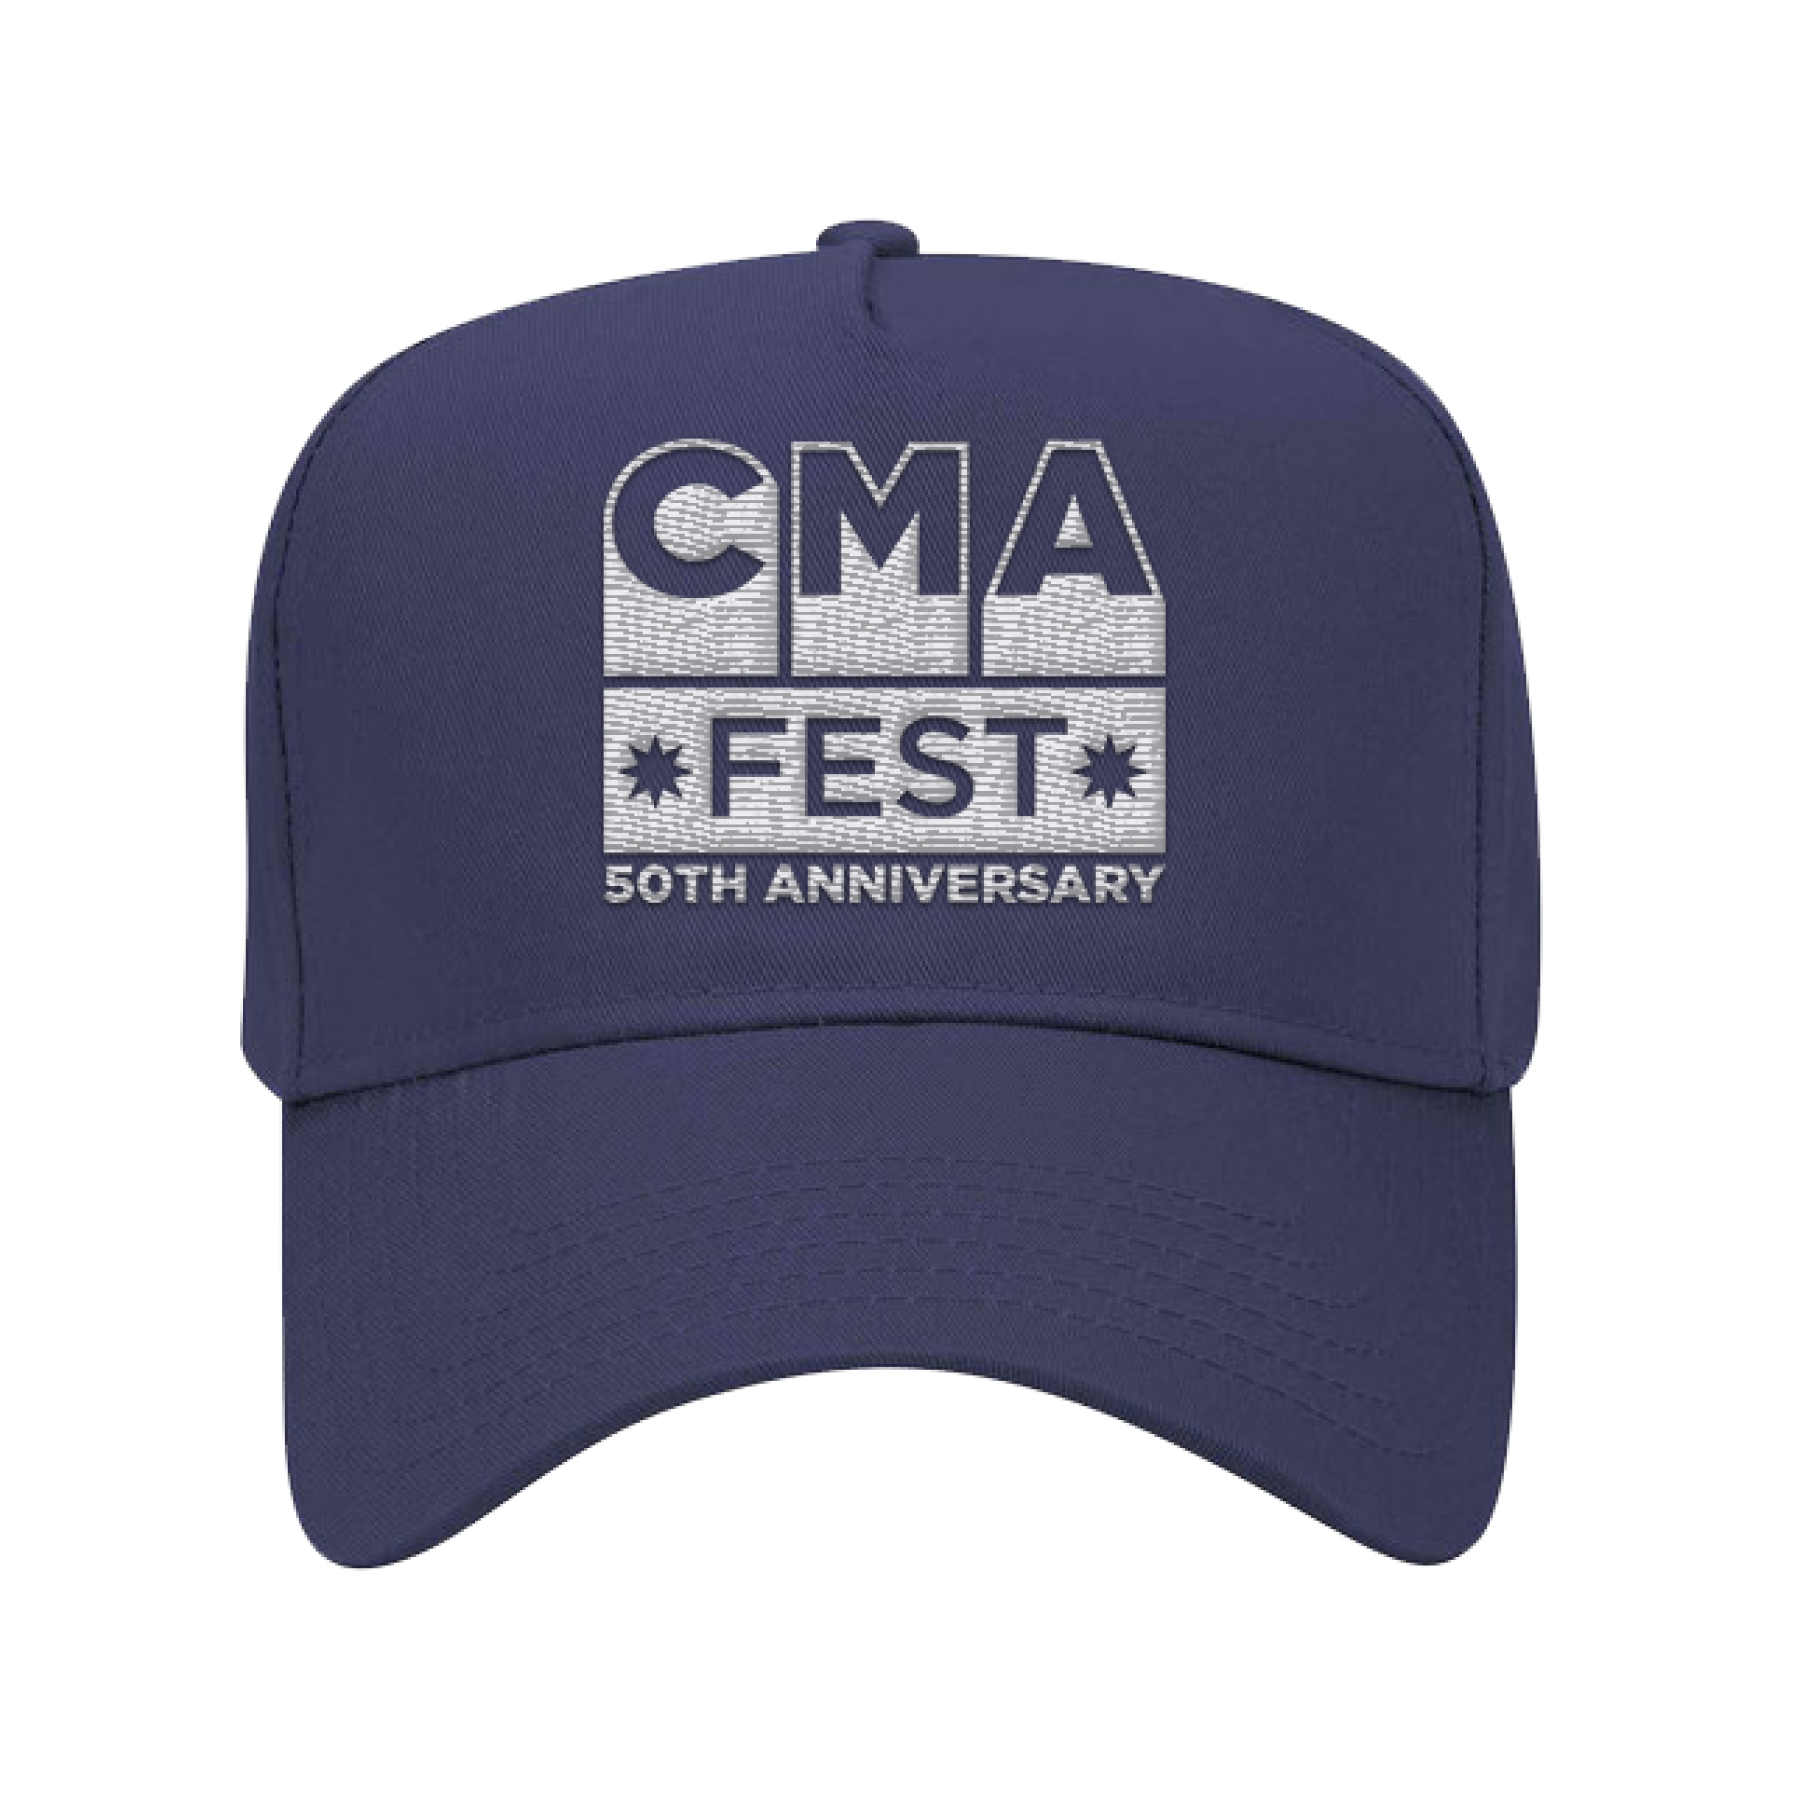 Official CMA Fest Merchandise. Blue hat with logo embroidered.